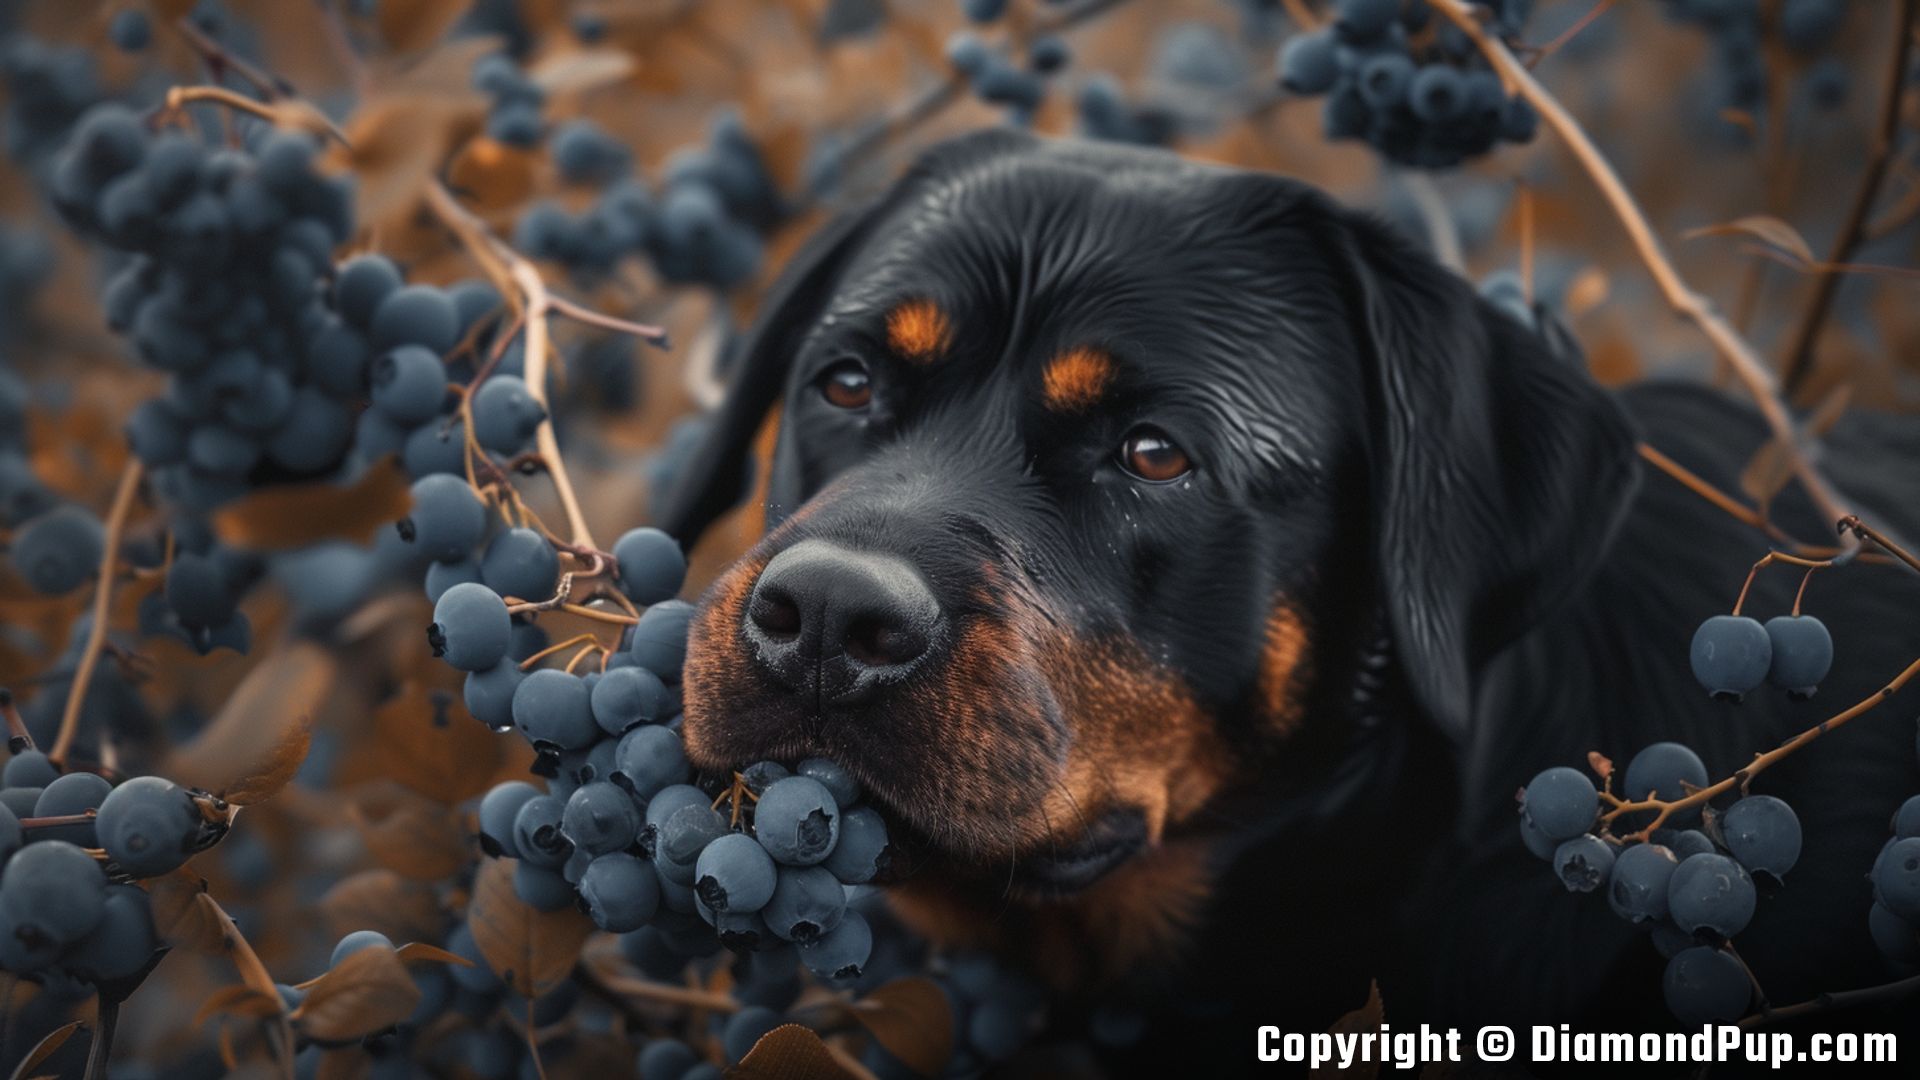 Photograph of Rottweiler Snacking on Blueberries